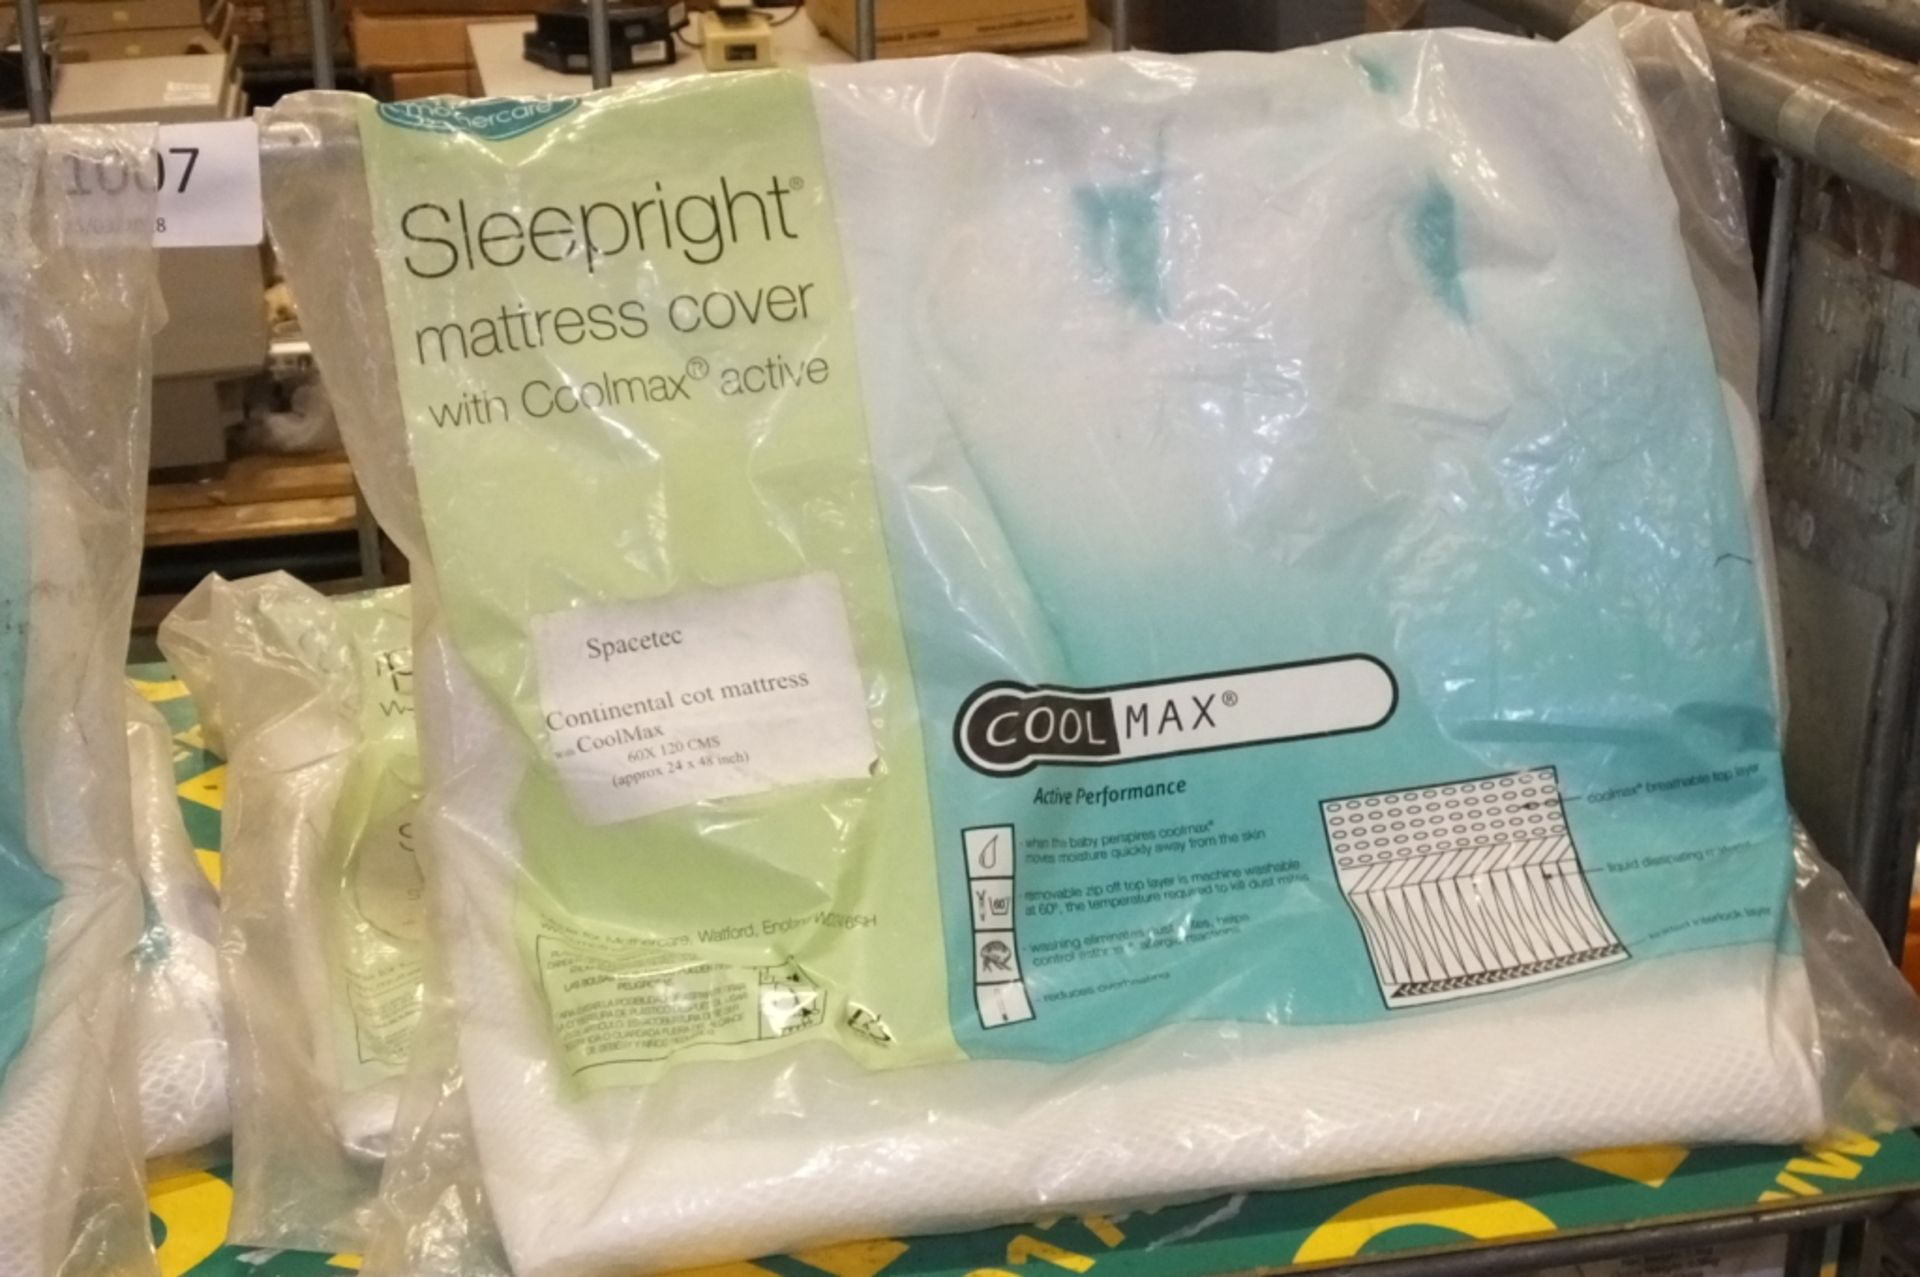 2x Mothercare Sleepright mattress covers - Image 2 of 2